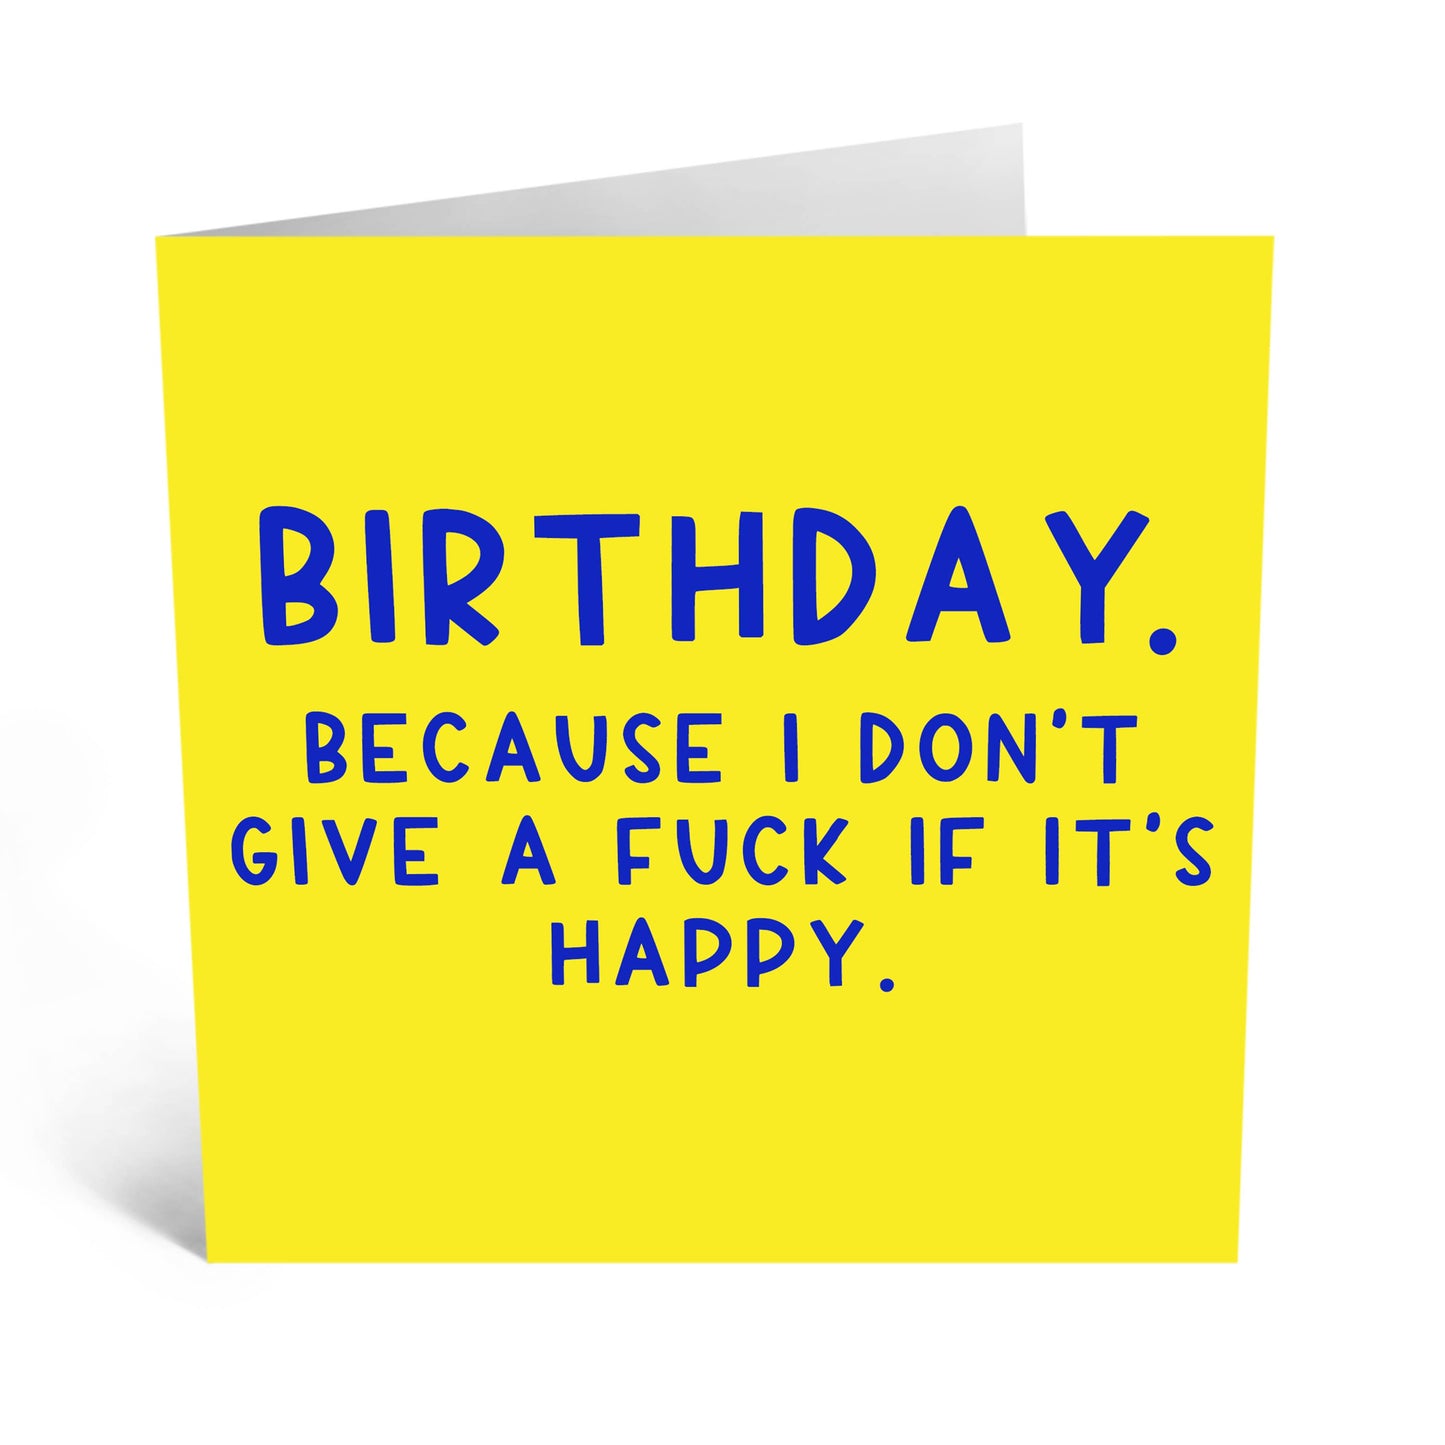 Birthday  - Because I dont give a f*** if its happy.